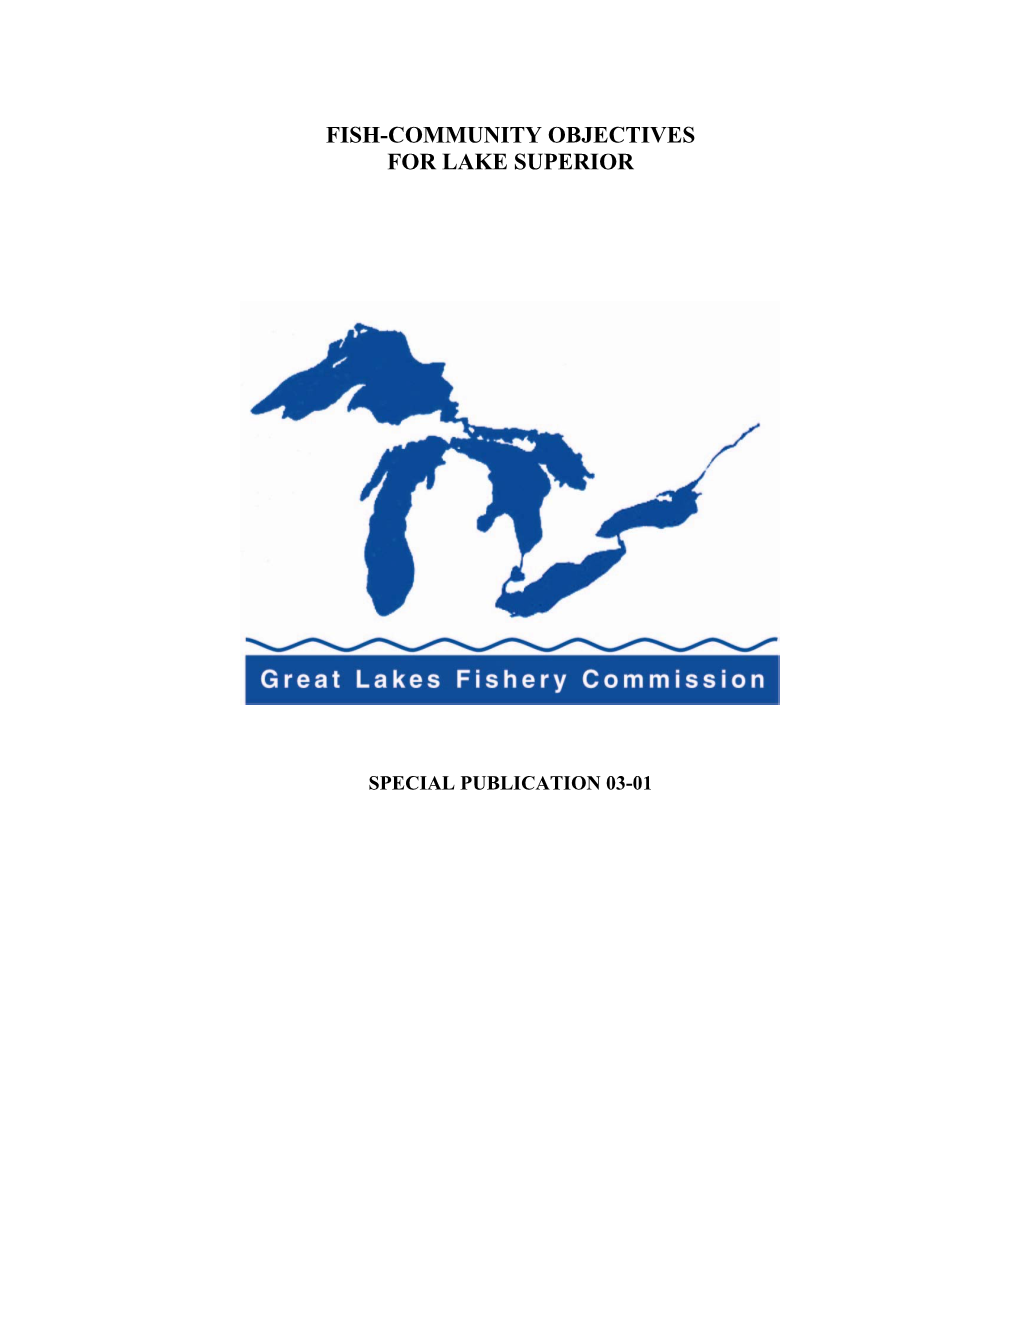 Fish-Community Objectives for Lake Superior. Great Lakes Fish